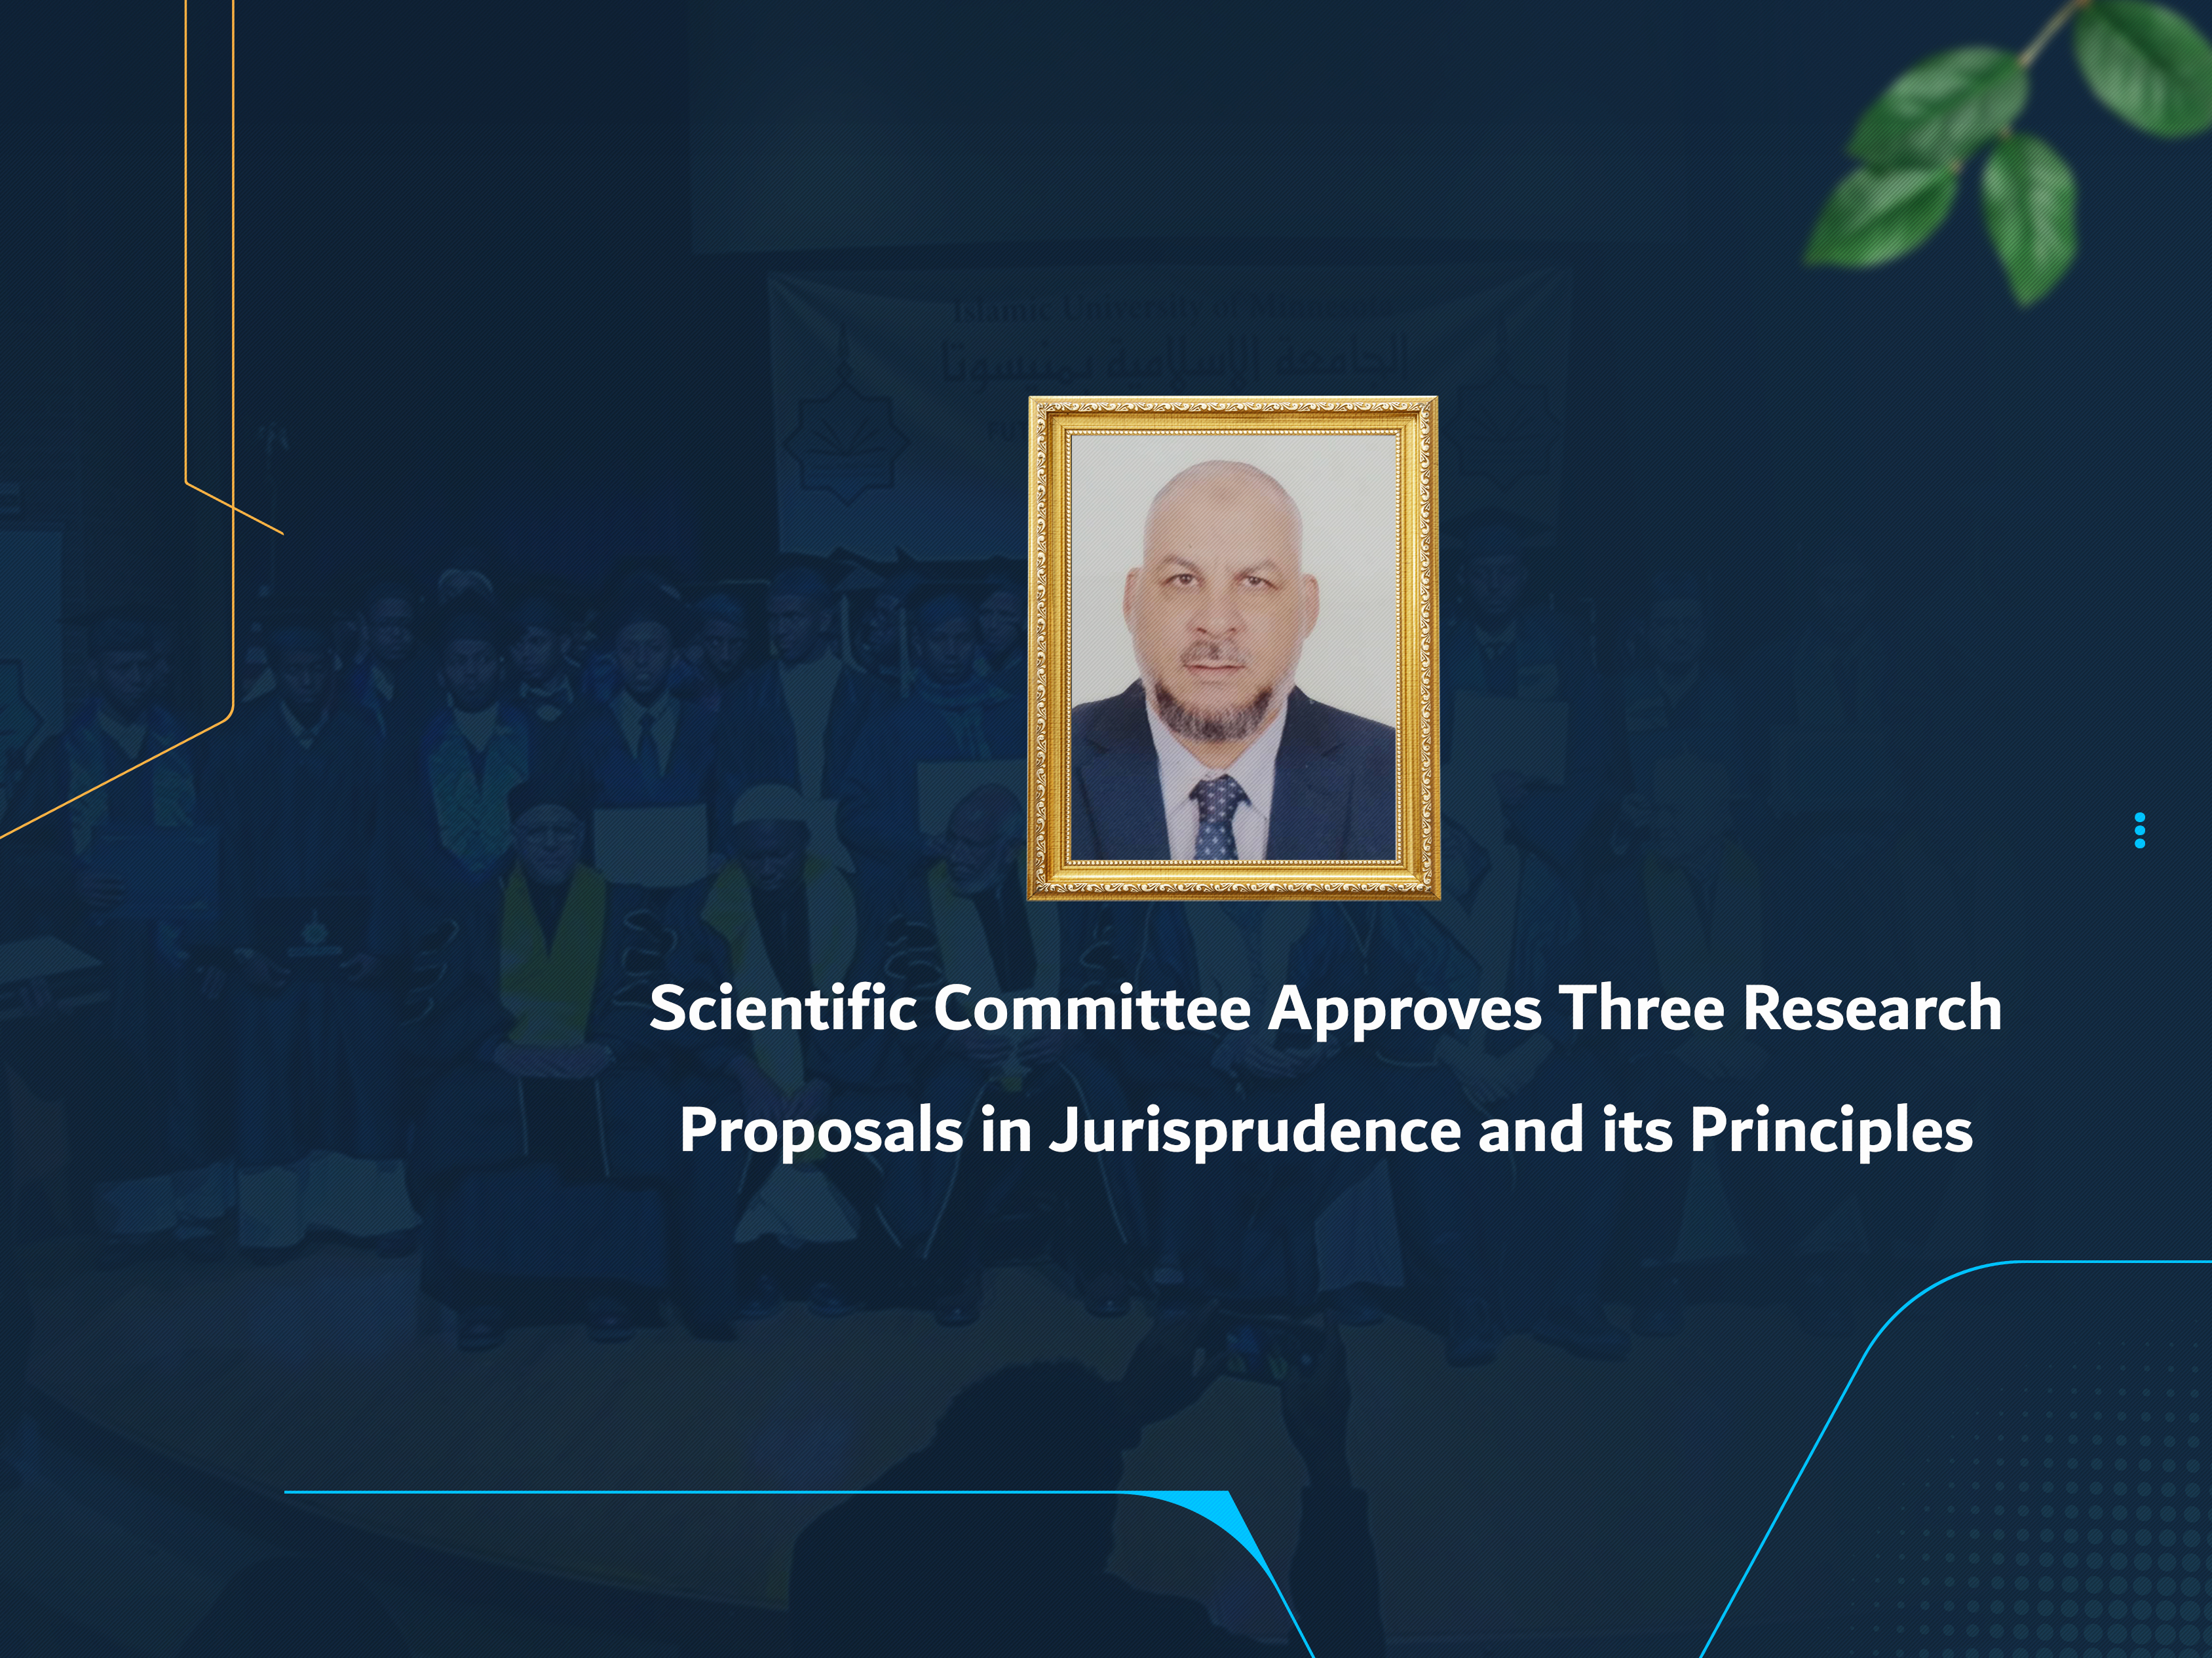 Scientific Committee Approves Three Research Proposals in Jurisprudence and its Principles